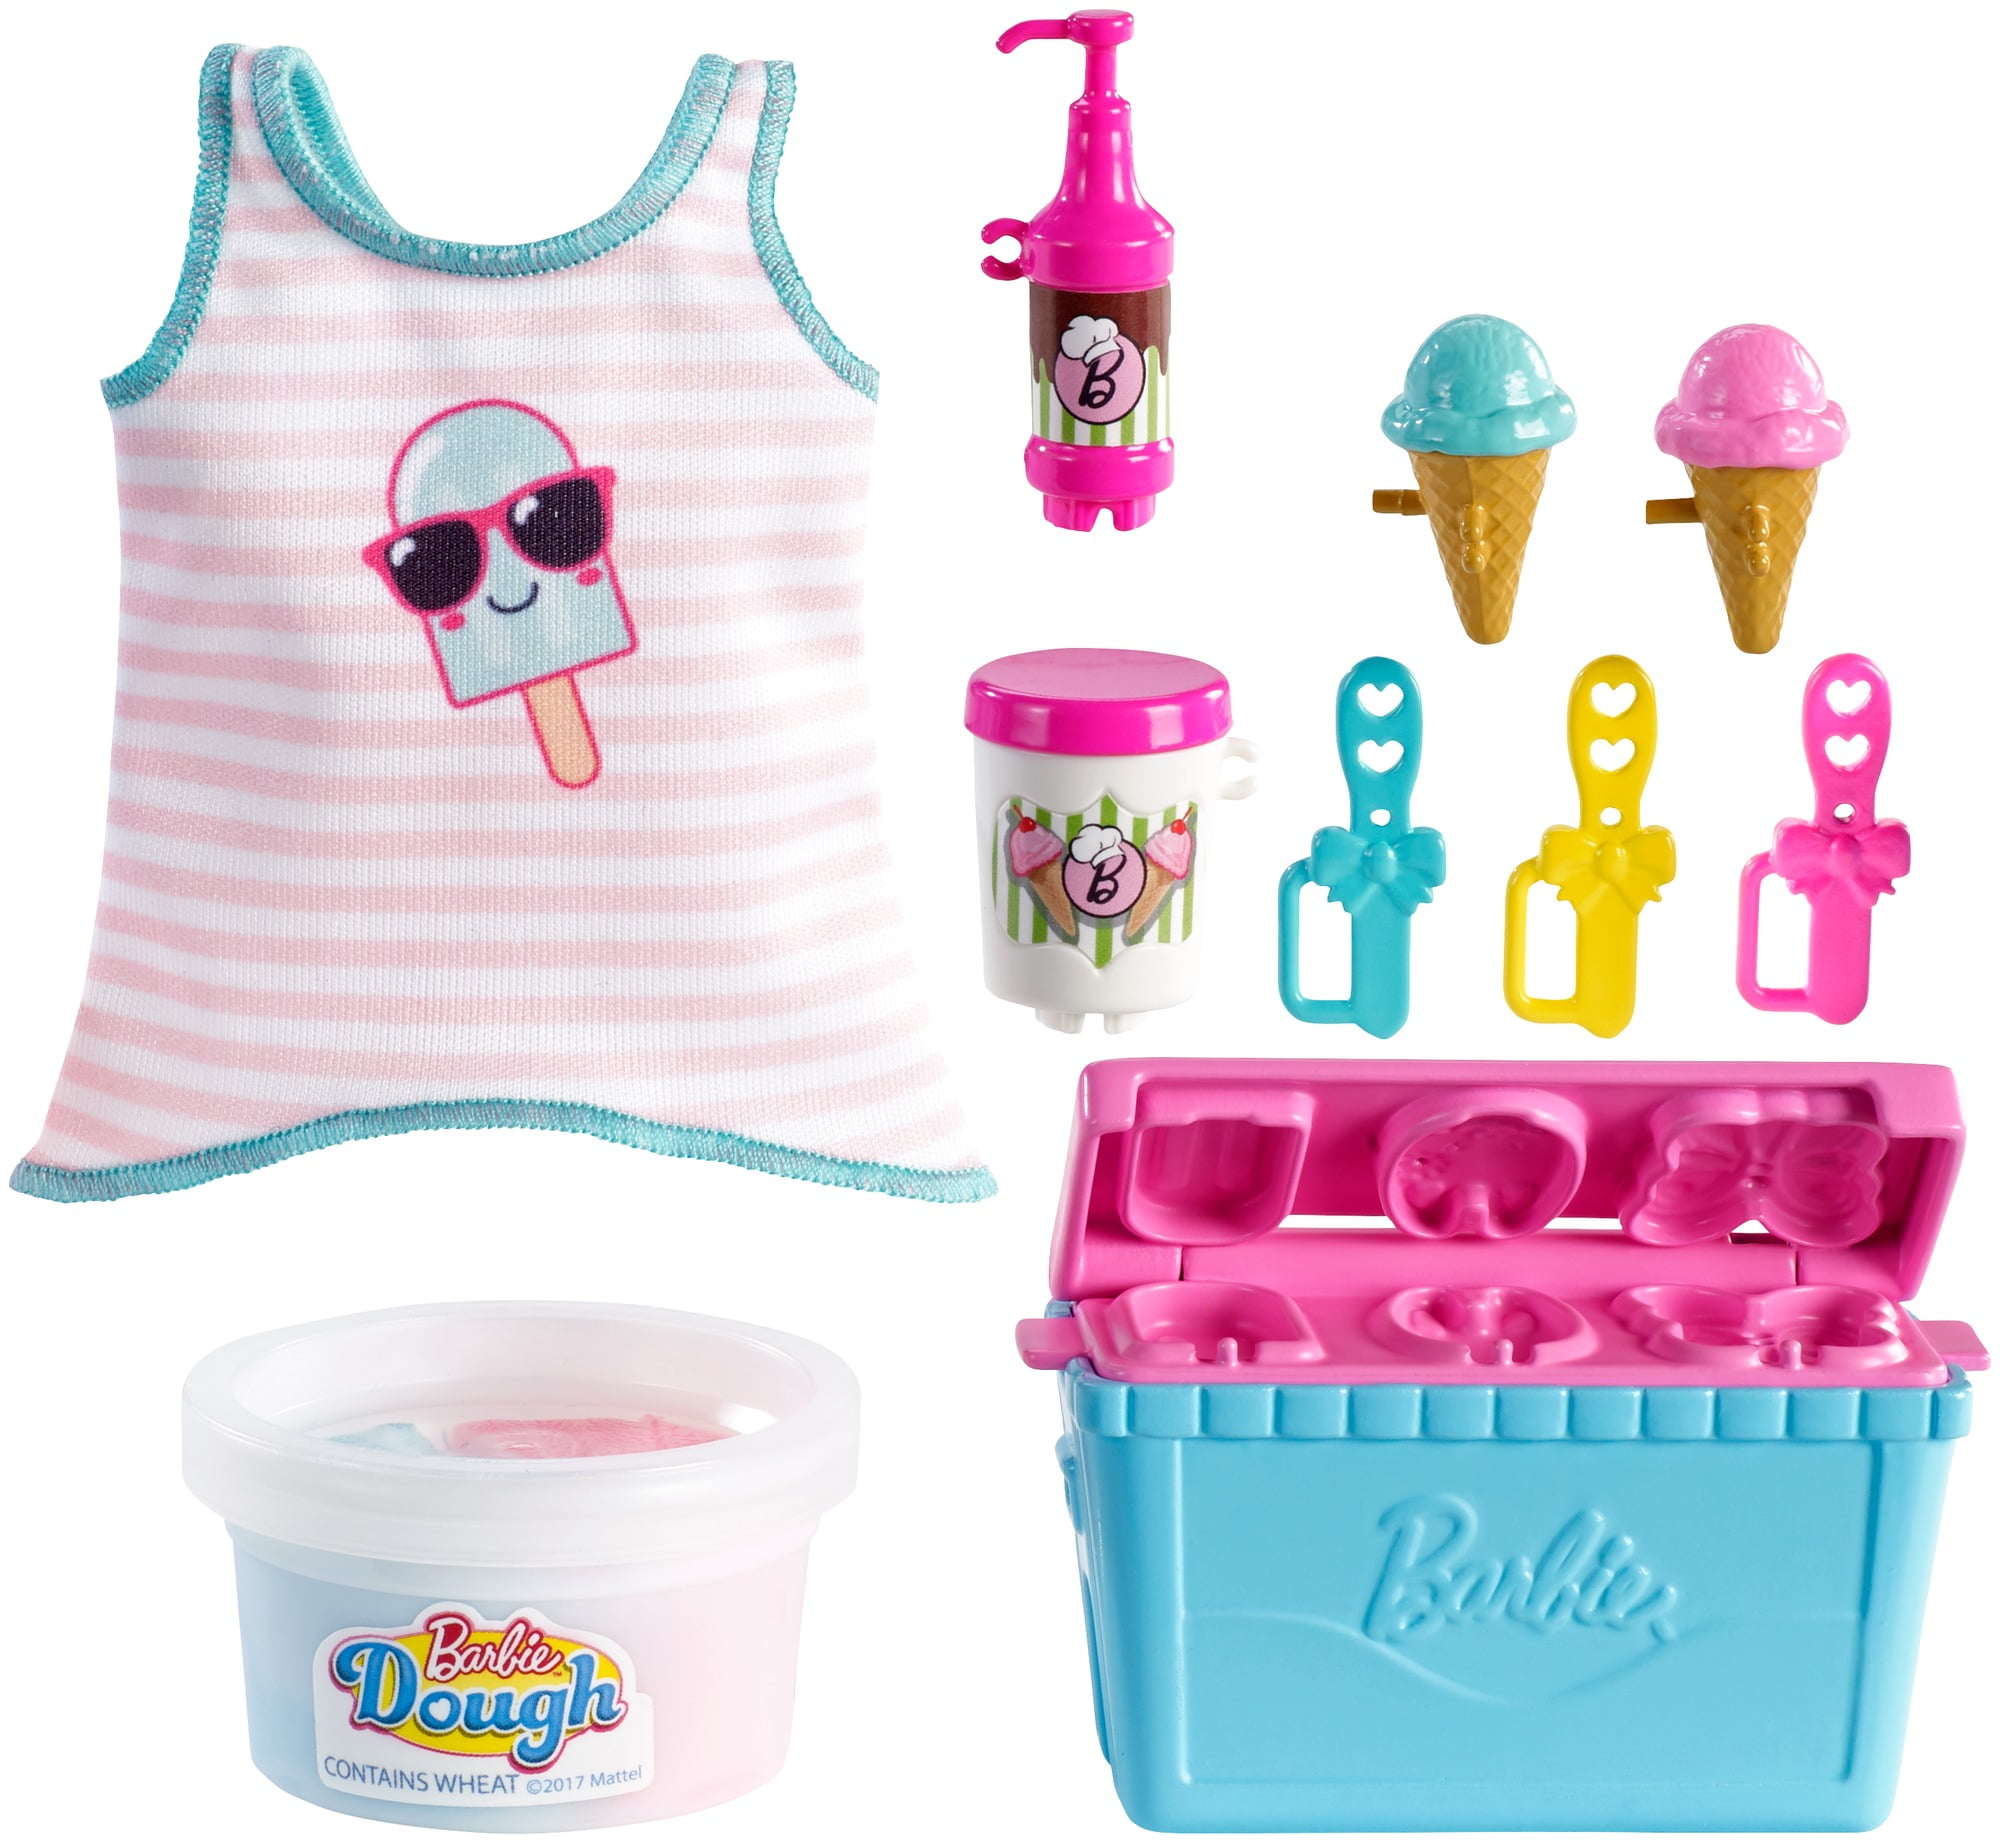  Barbie  Cooking  Baking Pack with Accessories and Barbie  